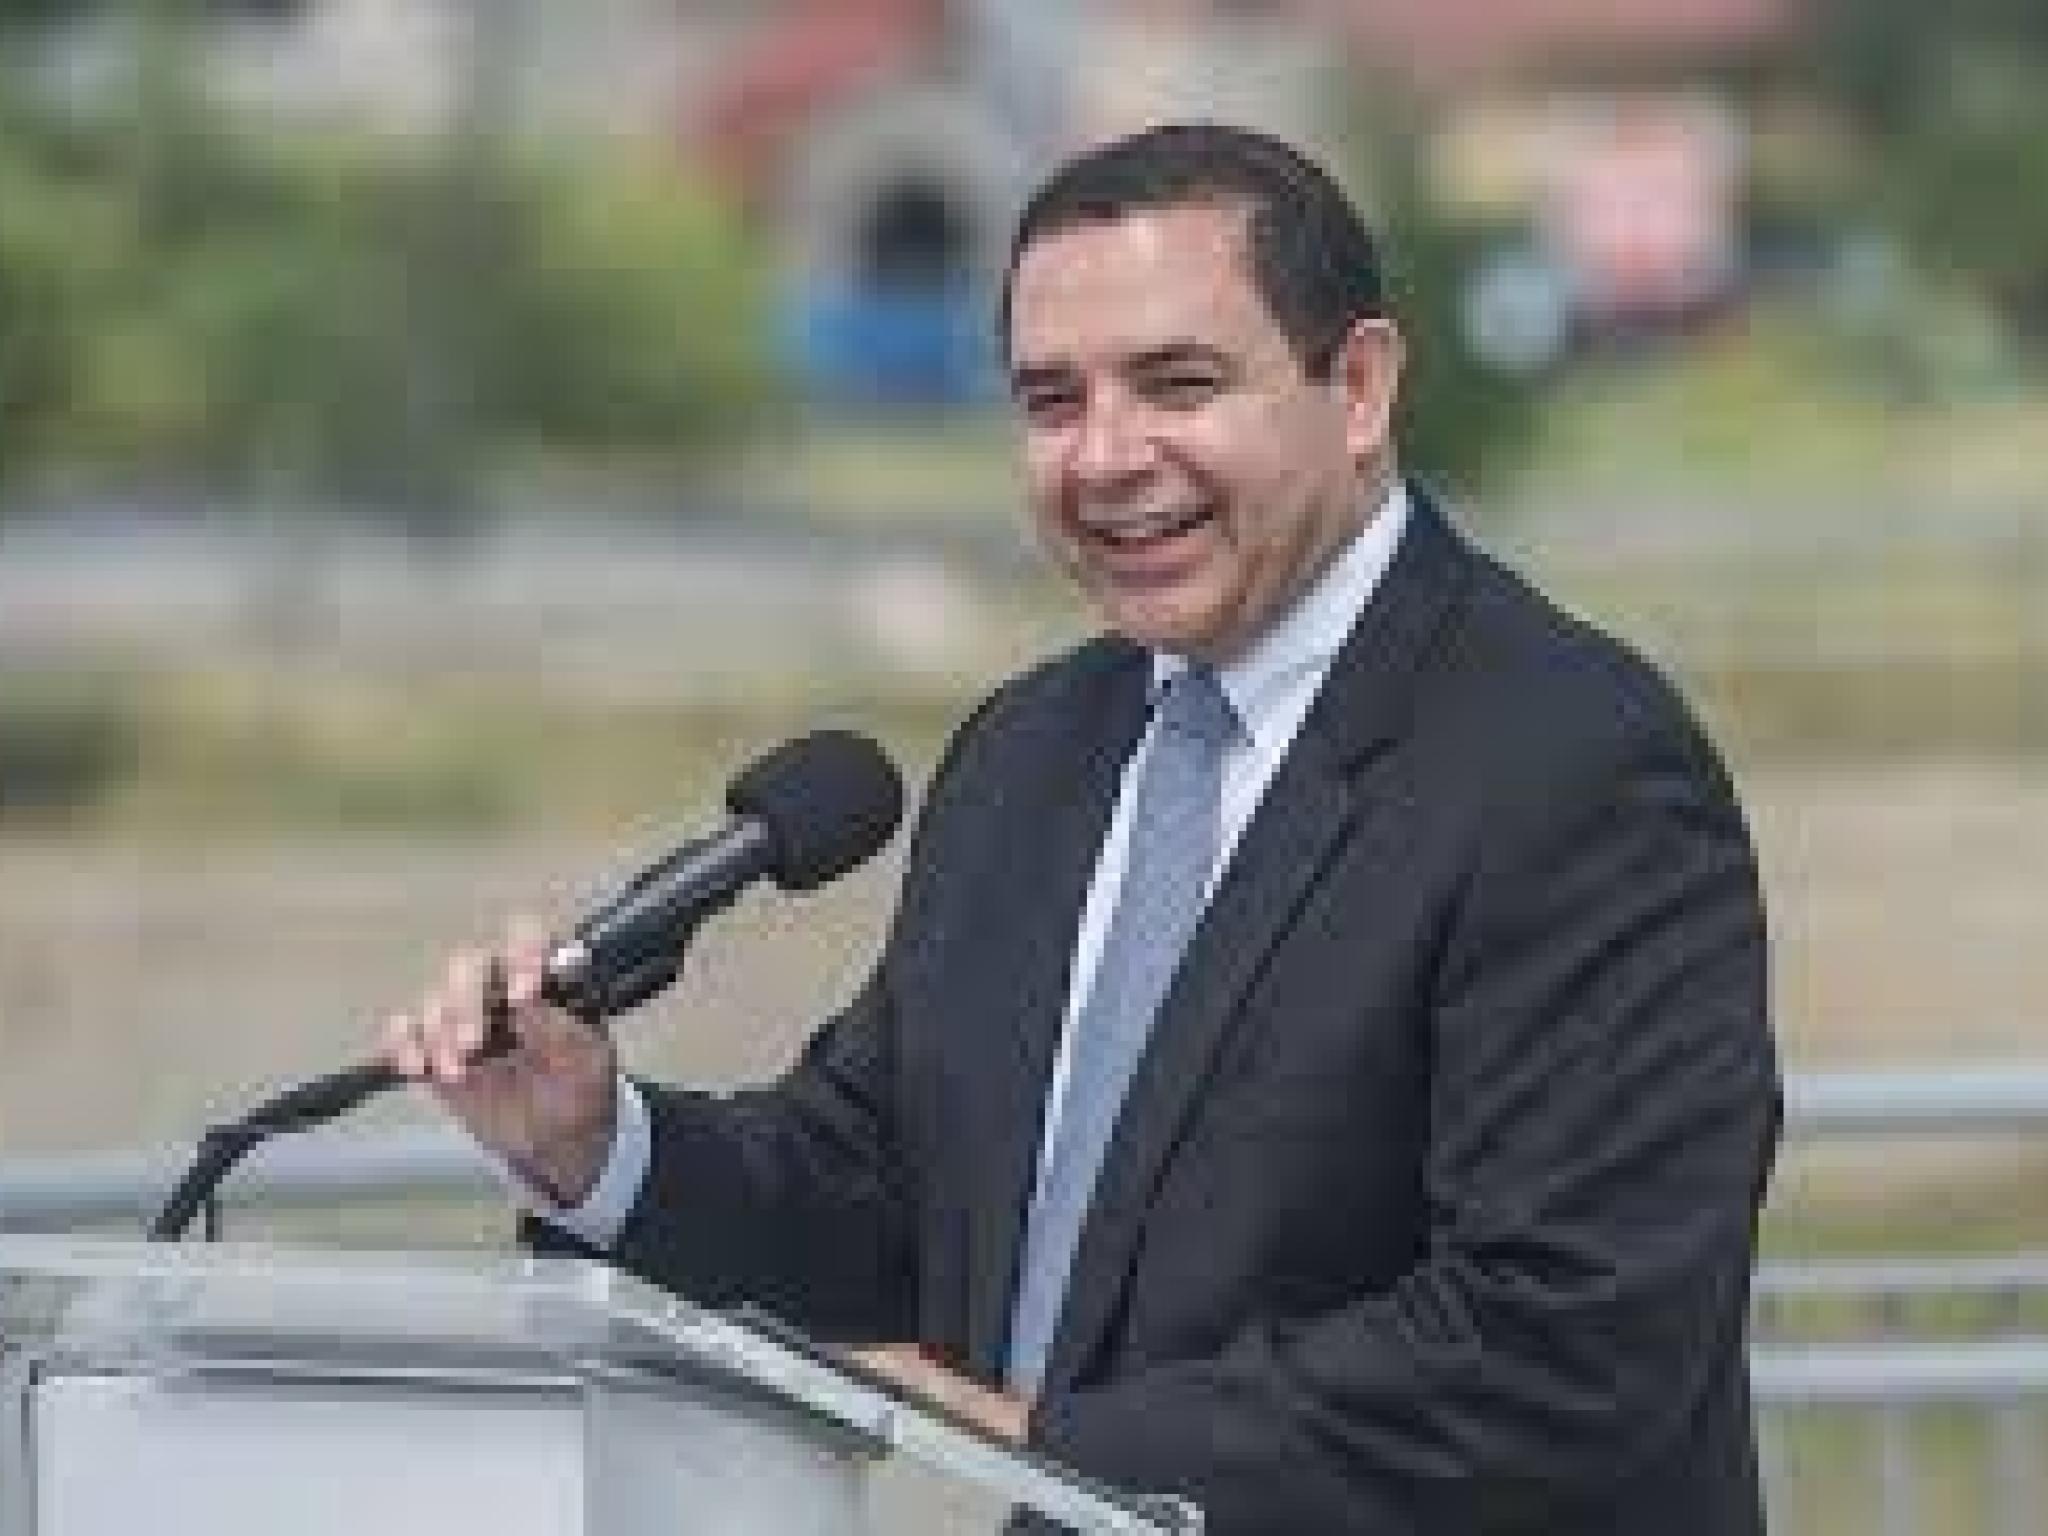  democratic-lawmaker-henry-cuellar-and-wife-accused-of-accepting-600k-in-bribes-are-innocent-of-these-allegations-says-congressman 